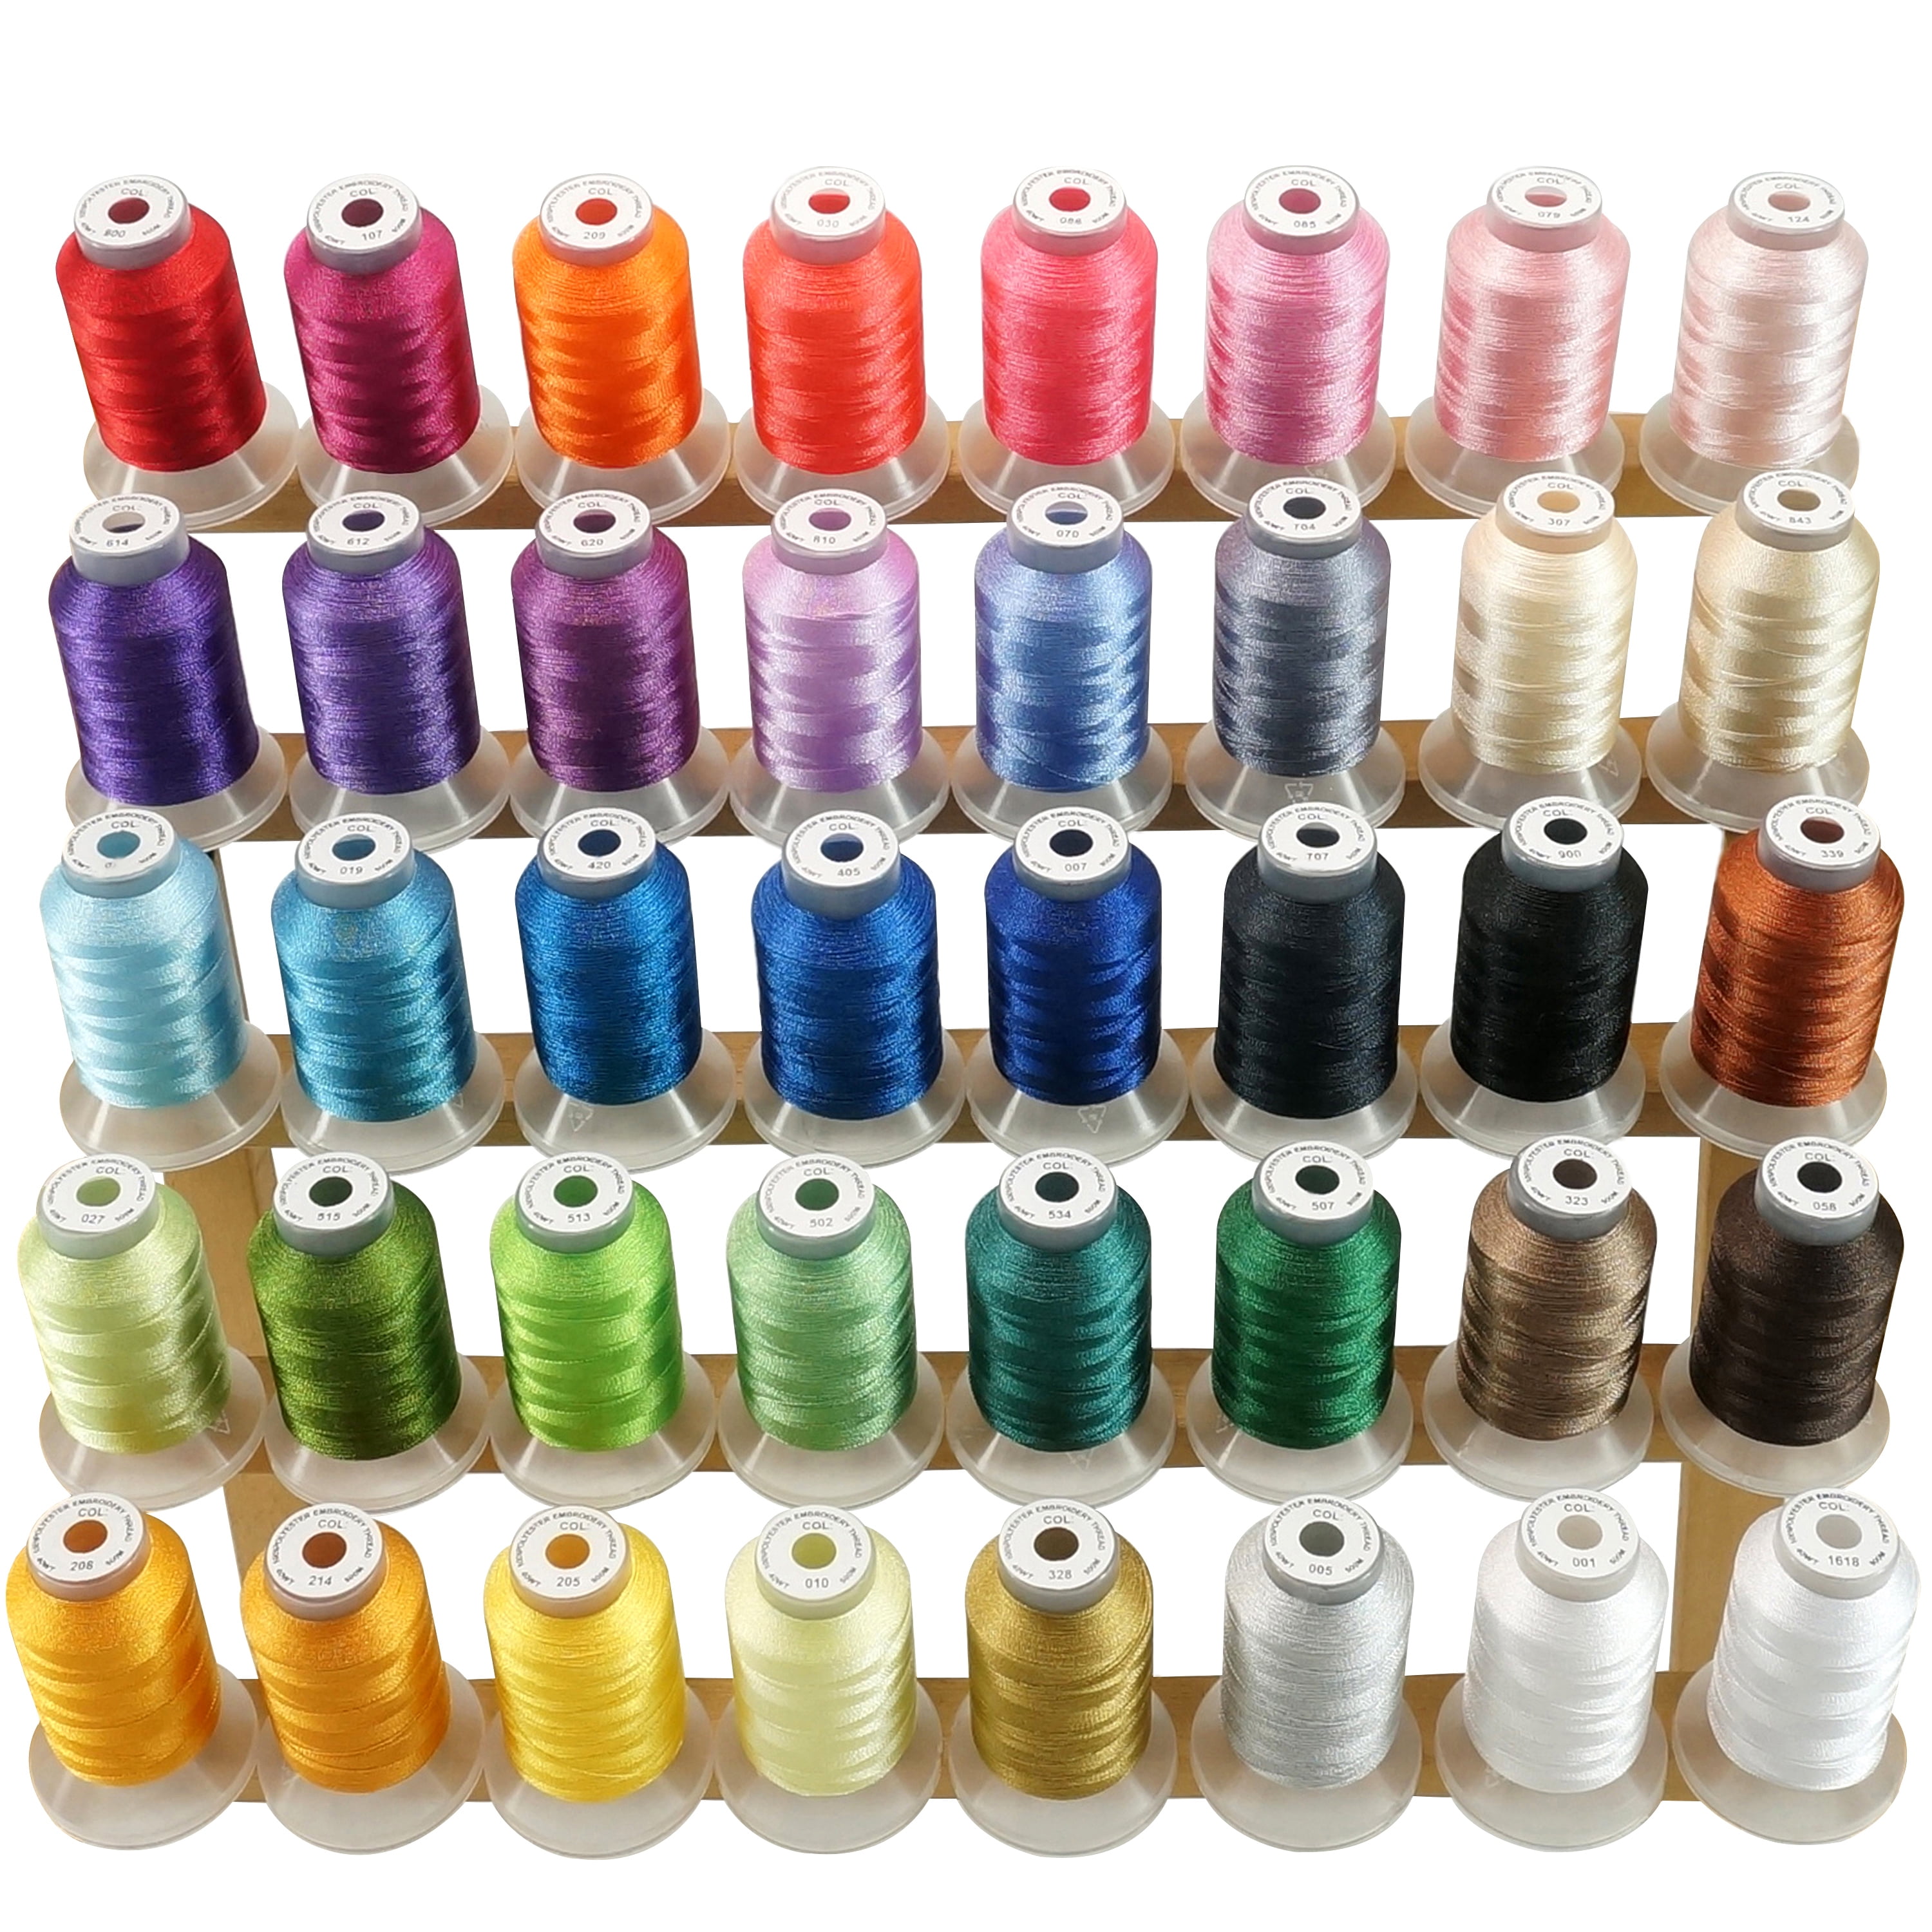 New brothread 40 Brother Colors Polyester Embroidery Machine